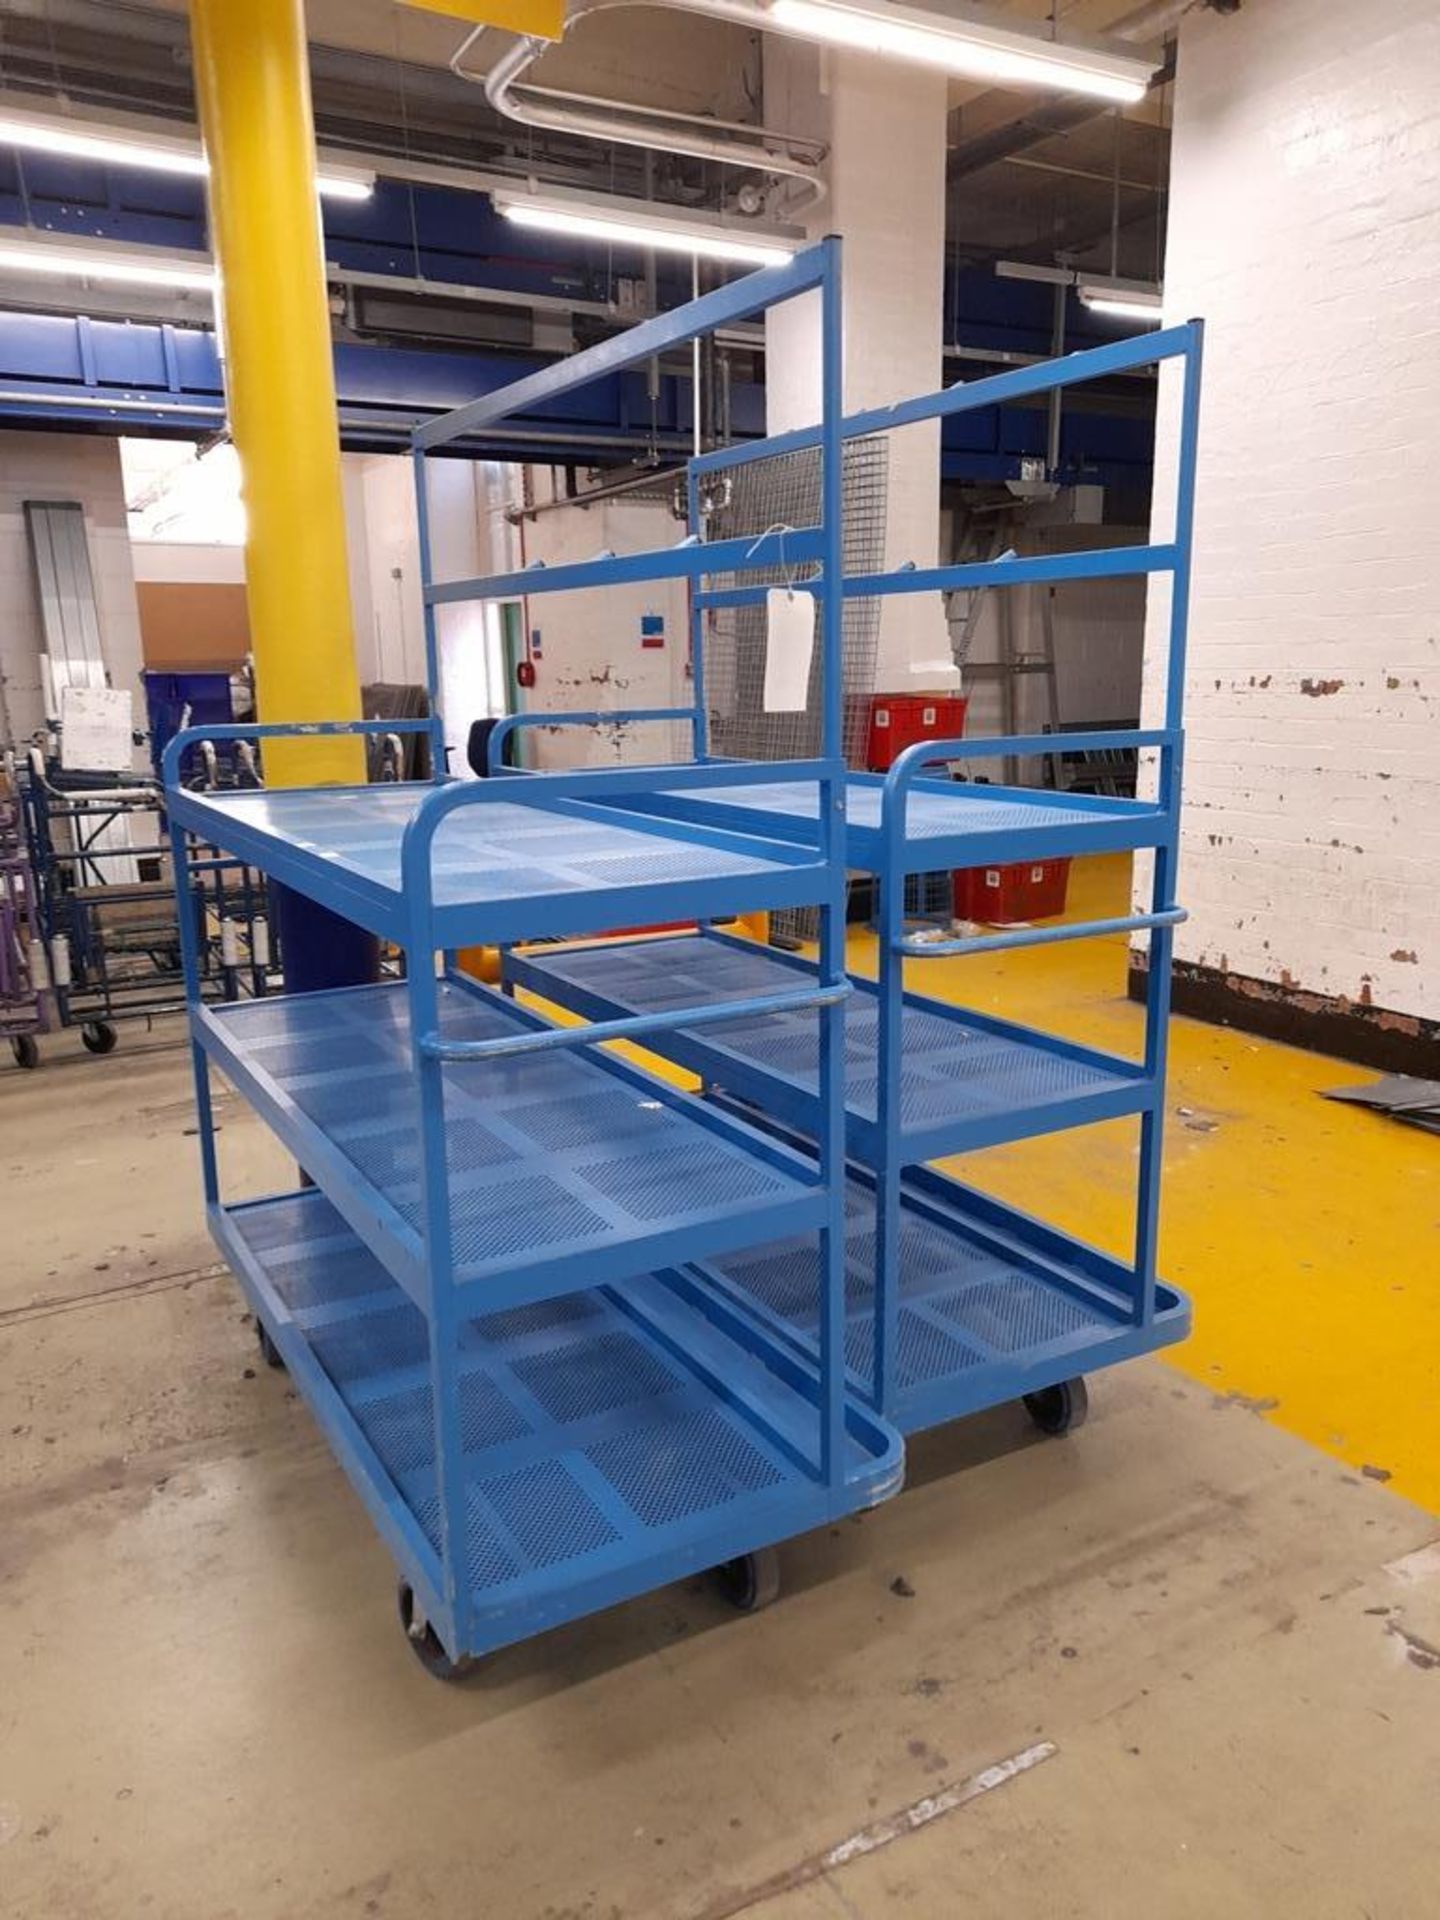 2 - Three tier trolley, with hanging shelf, as lotted (blue) (image for illustration purposes only)